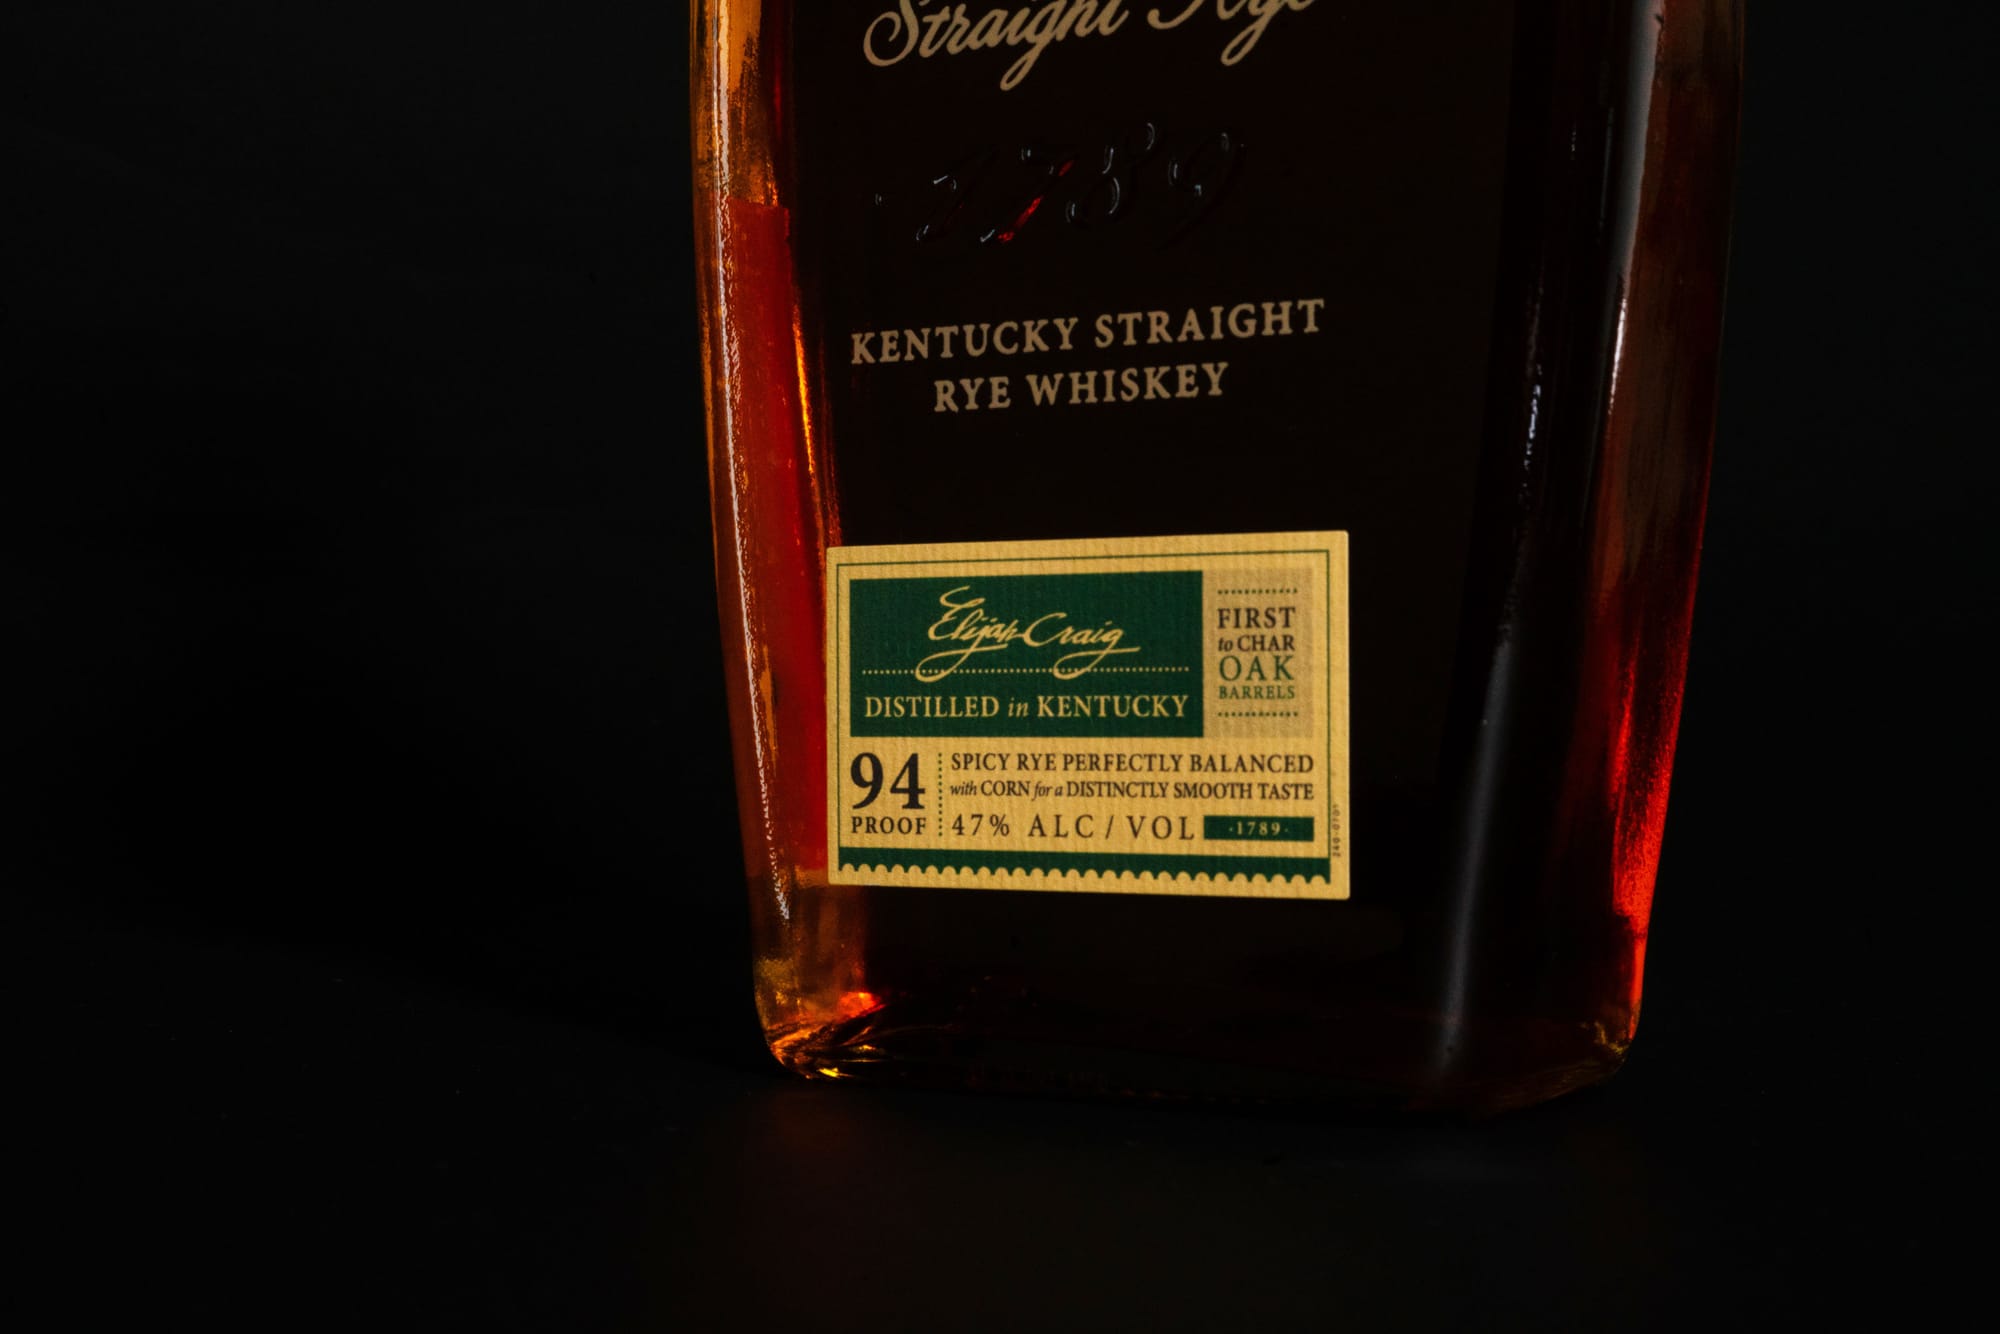 The label is right: this is a well balanced rye whiskey. Photo: Boothby